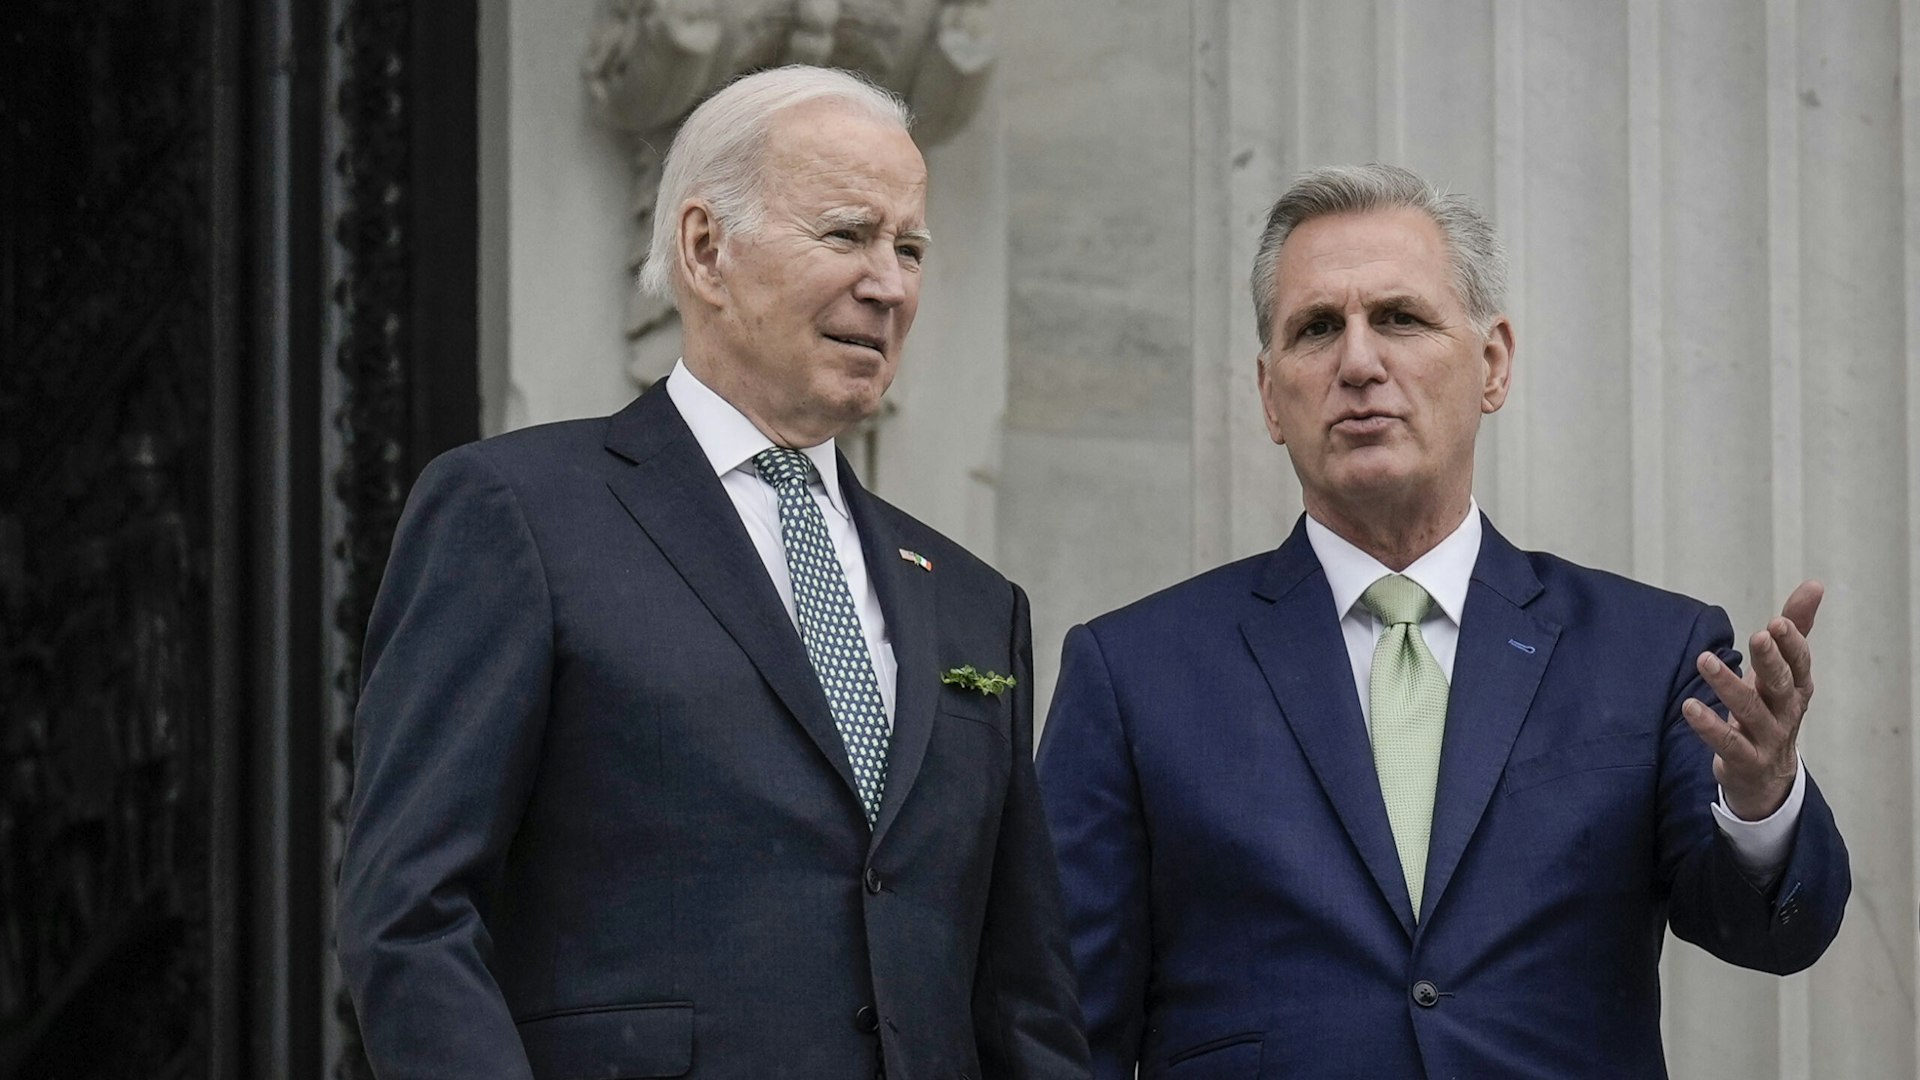 U.S. President Joe Biden and Speaker of the House Kevin McCarthy (R-CA) talk as they depart the U.S. Capitol following the Friends of Ireland Luncheon on Saint Patrick's Day March 17, 2023 in Washington, DC.